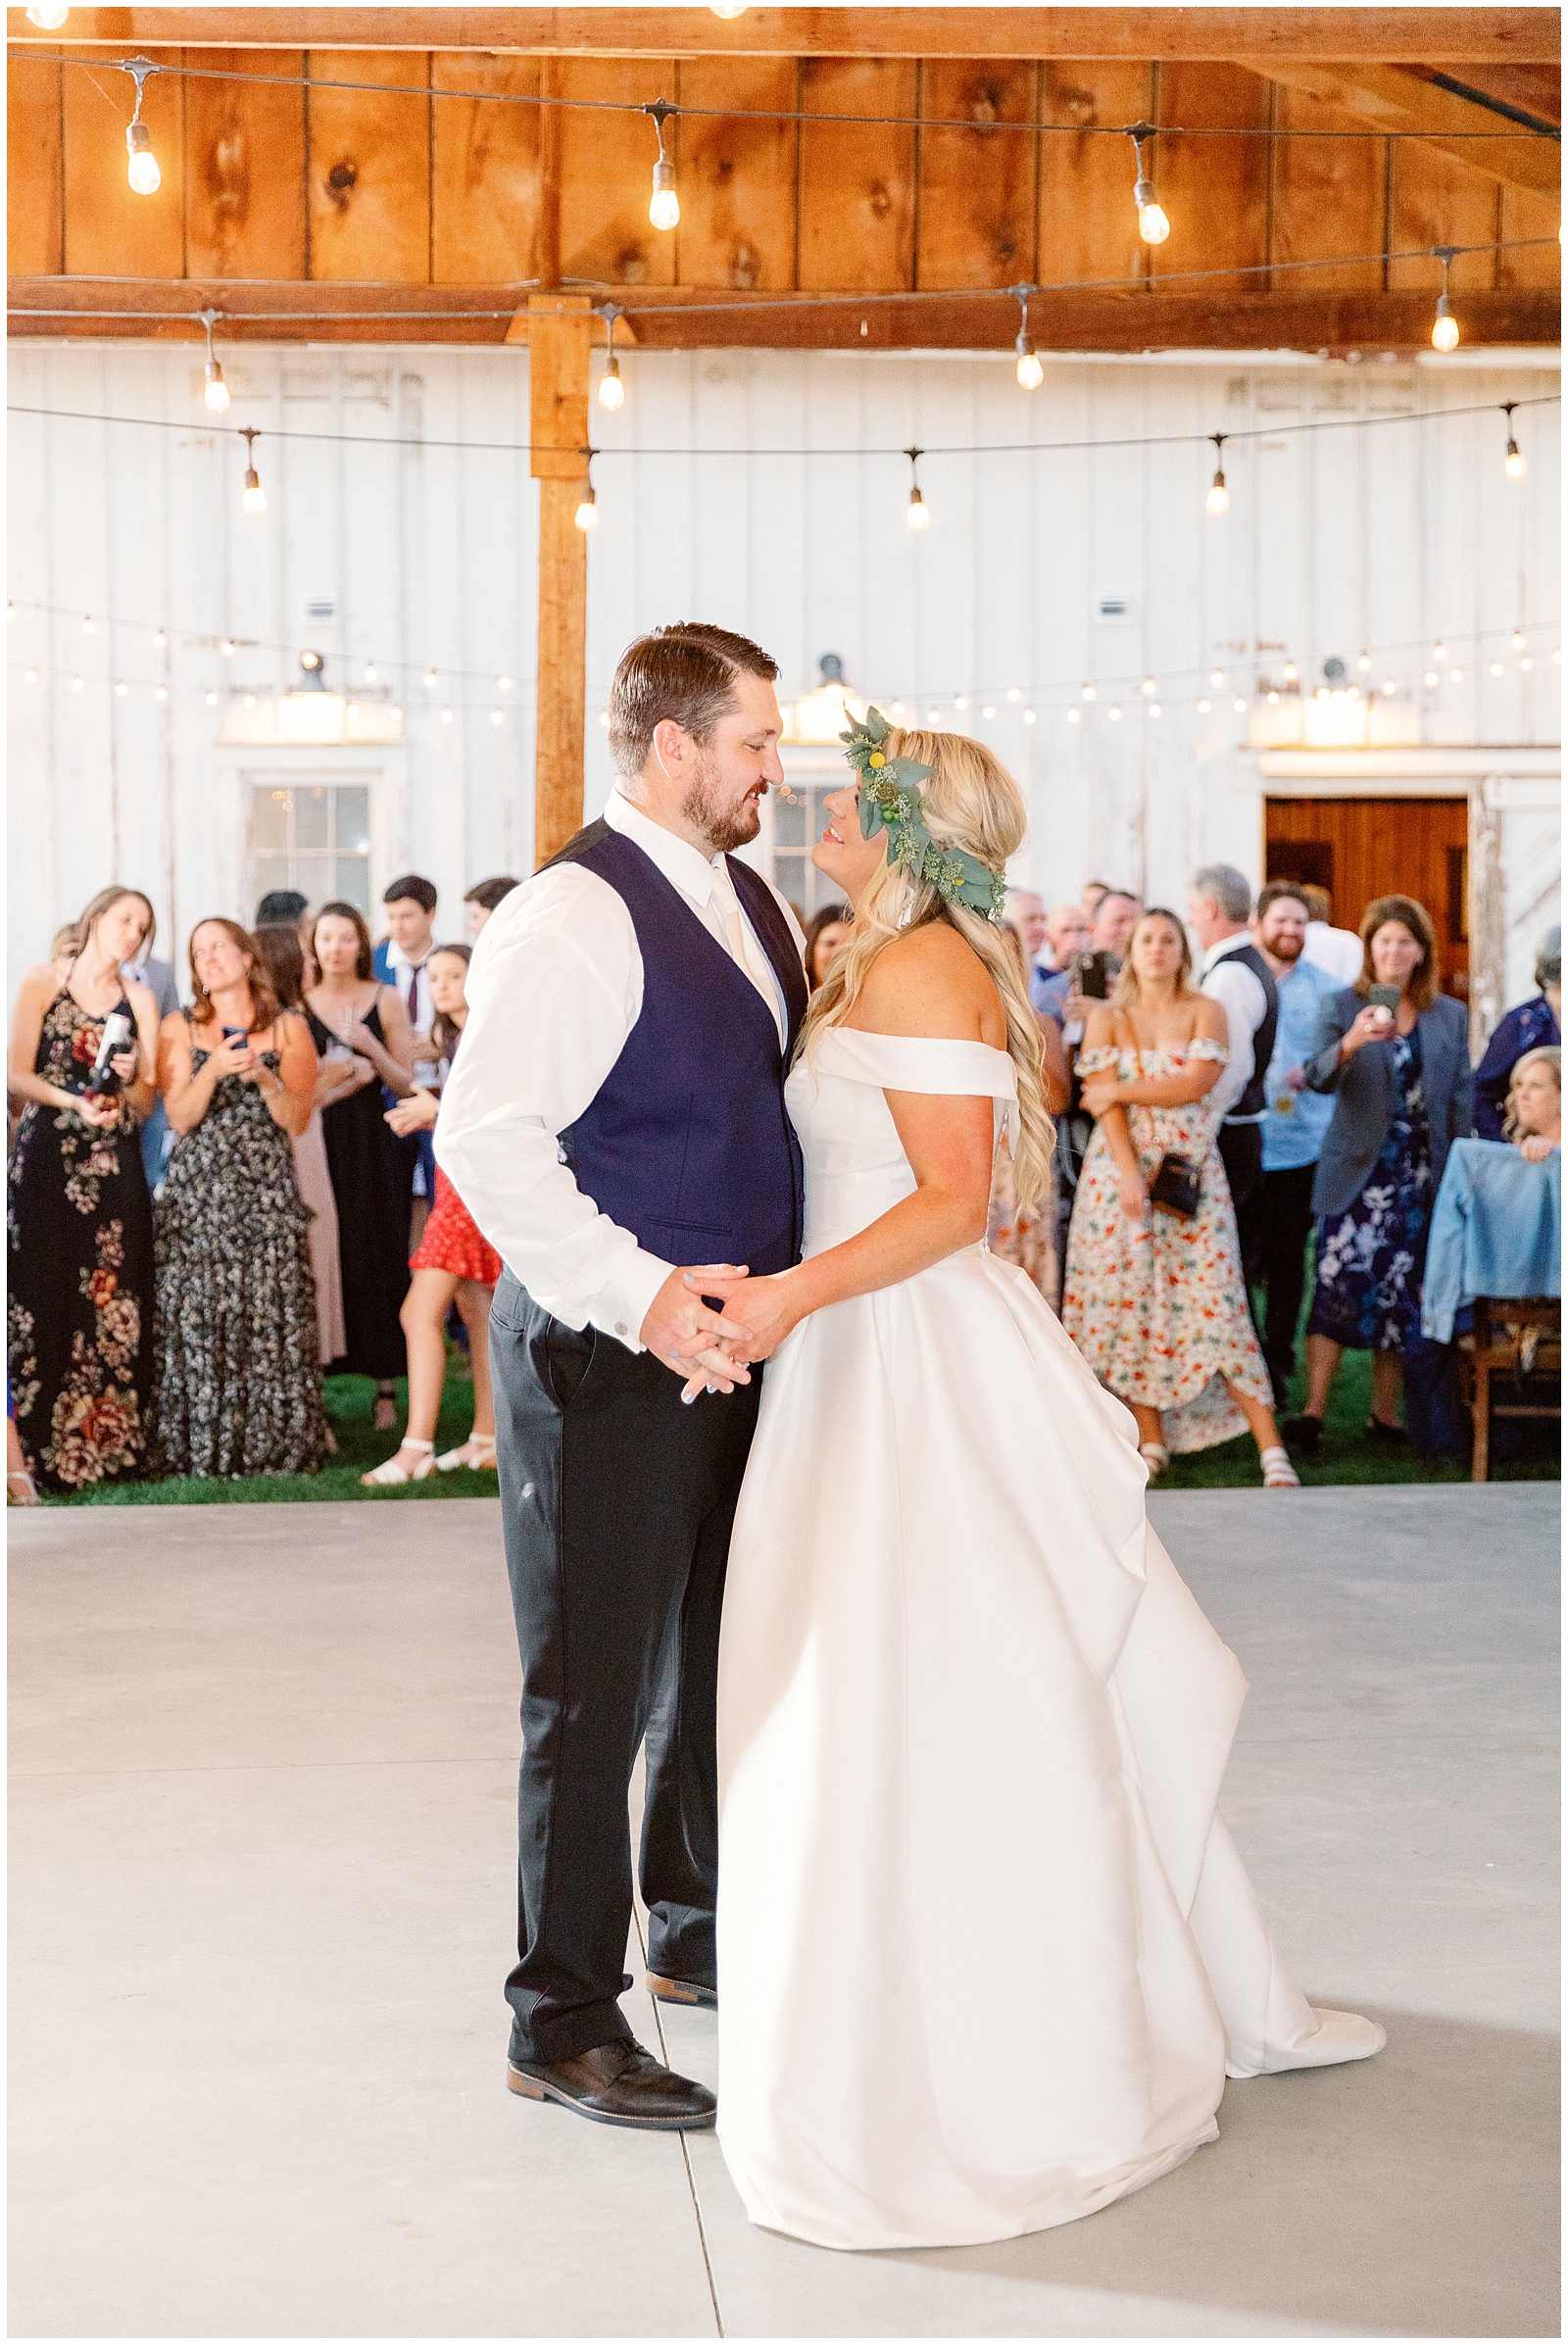 Bride and groom sharing their first dance